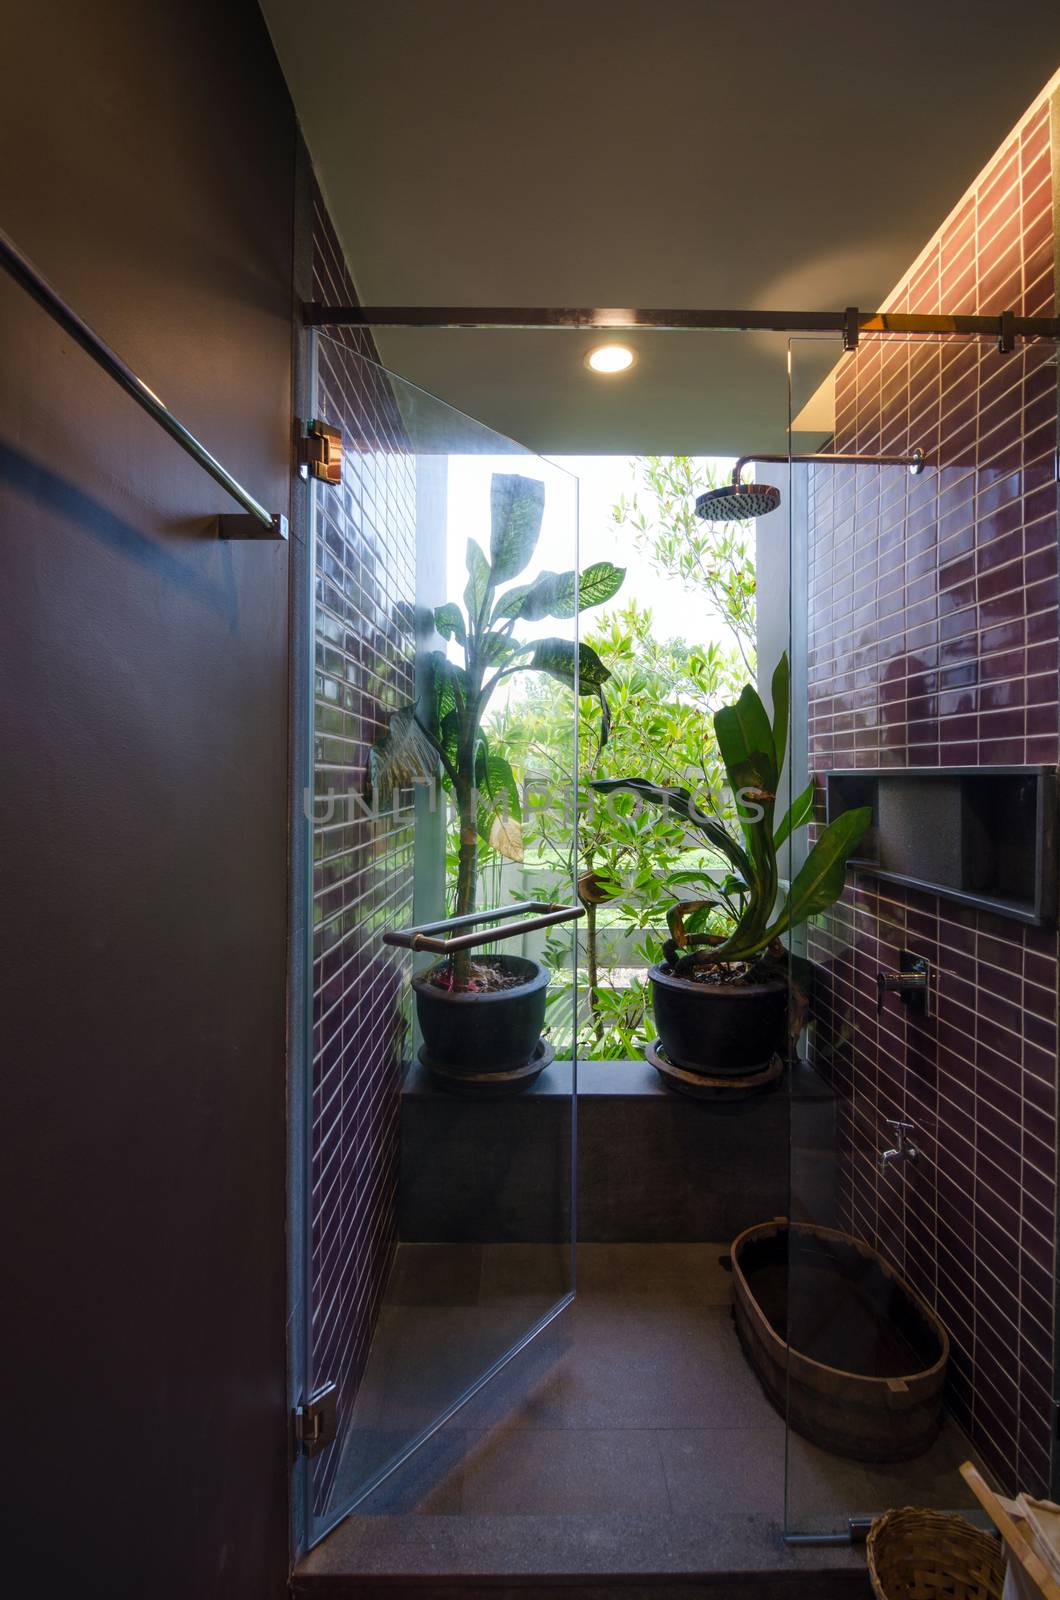 Shower Room with nature  by siraanamwong